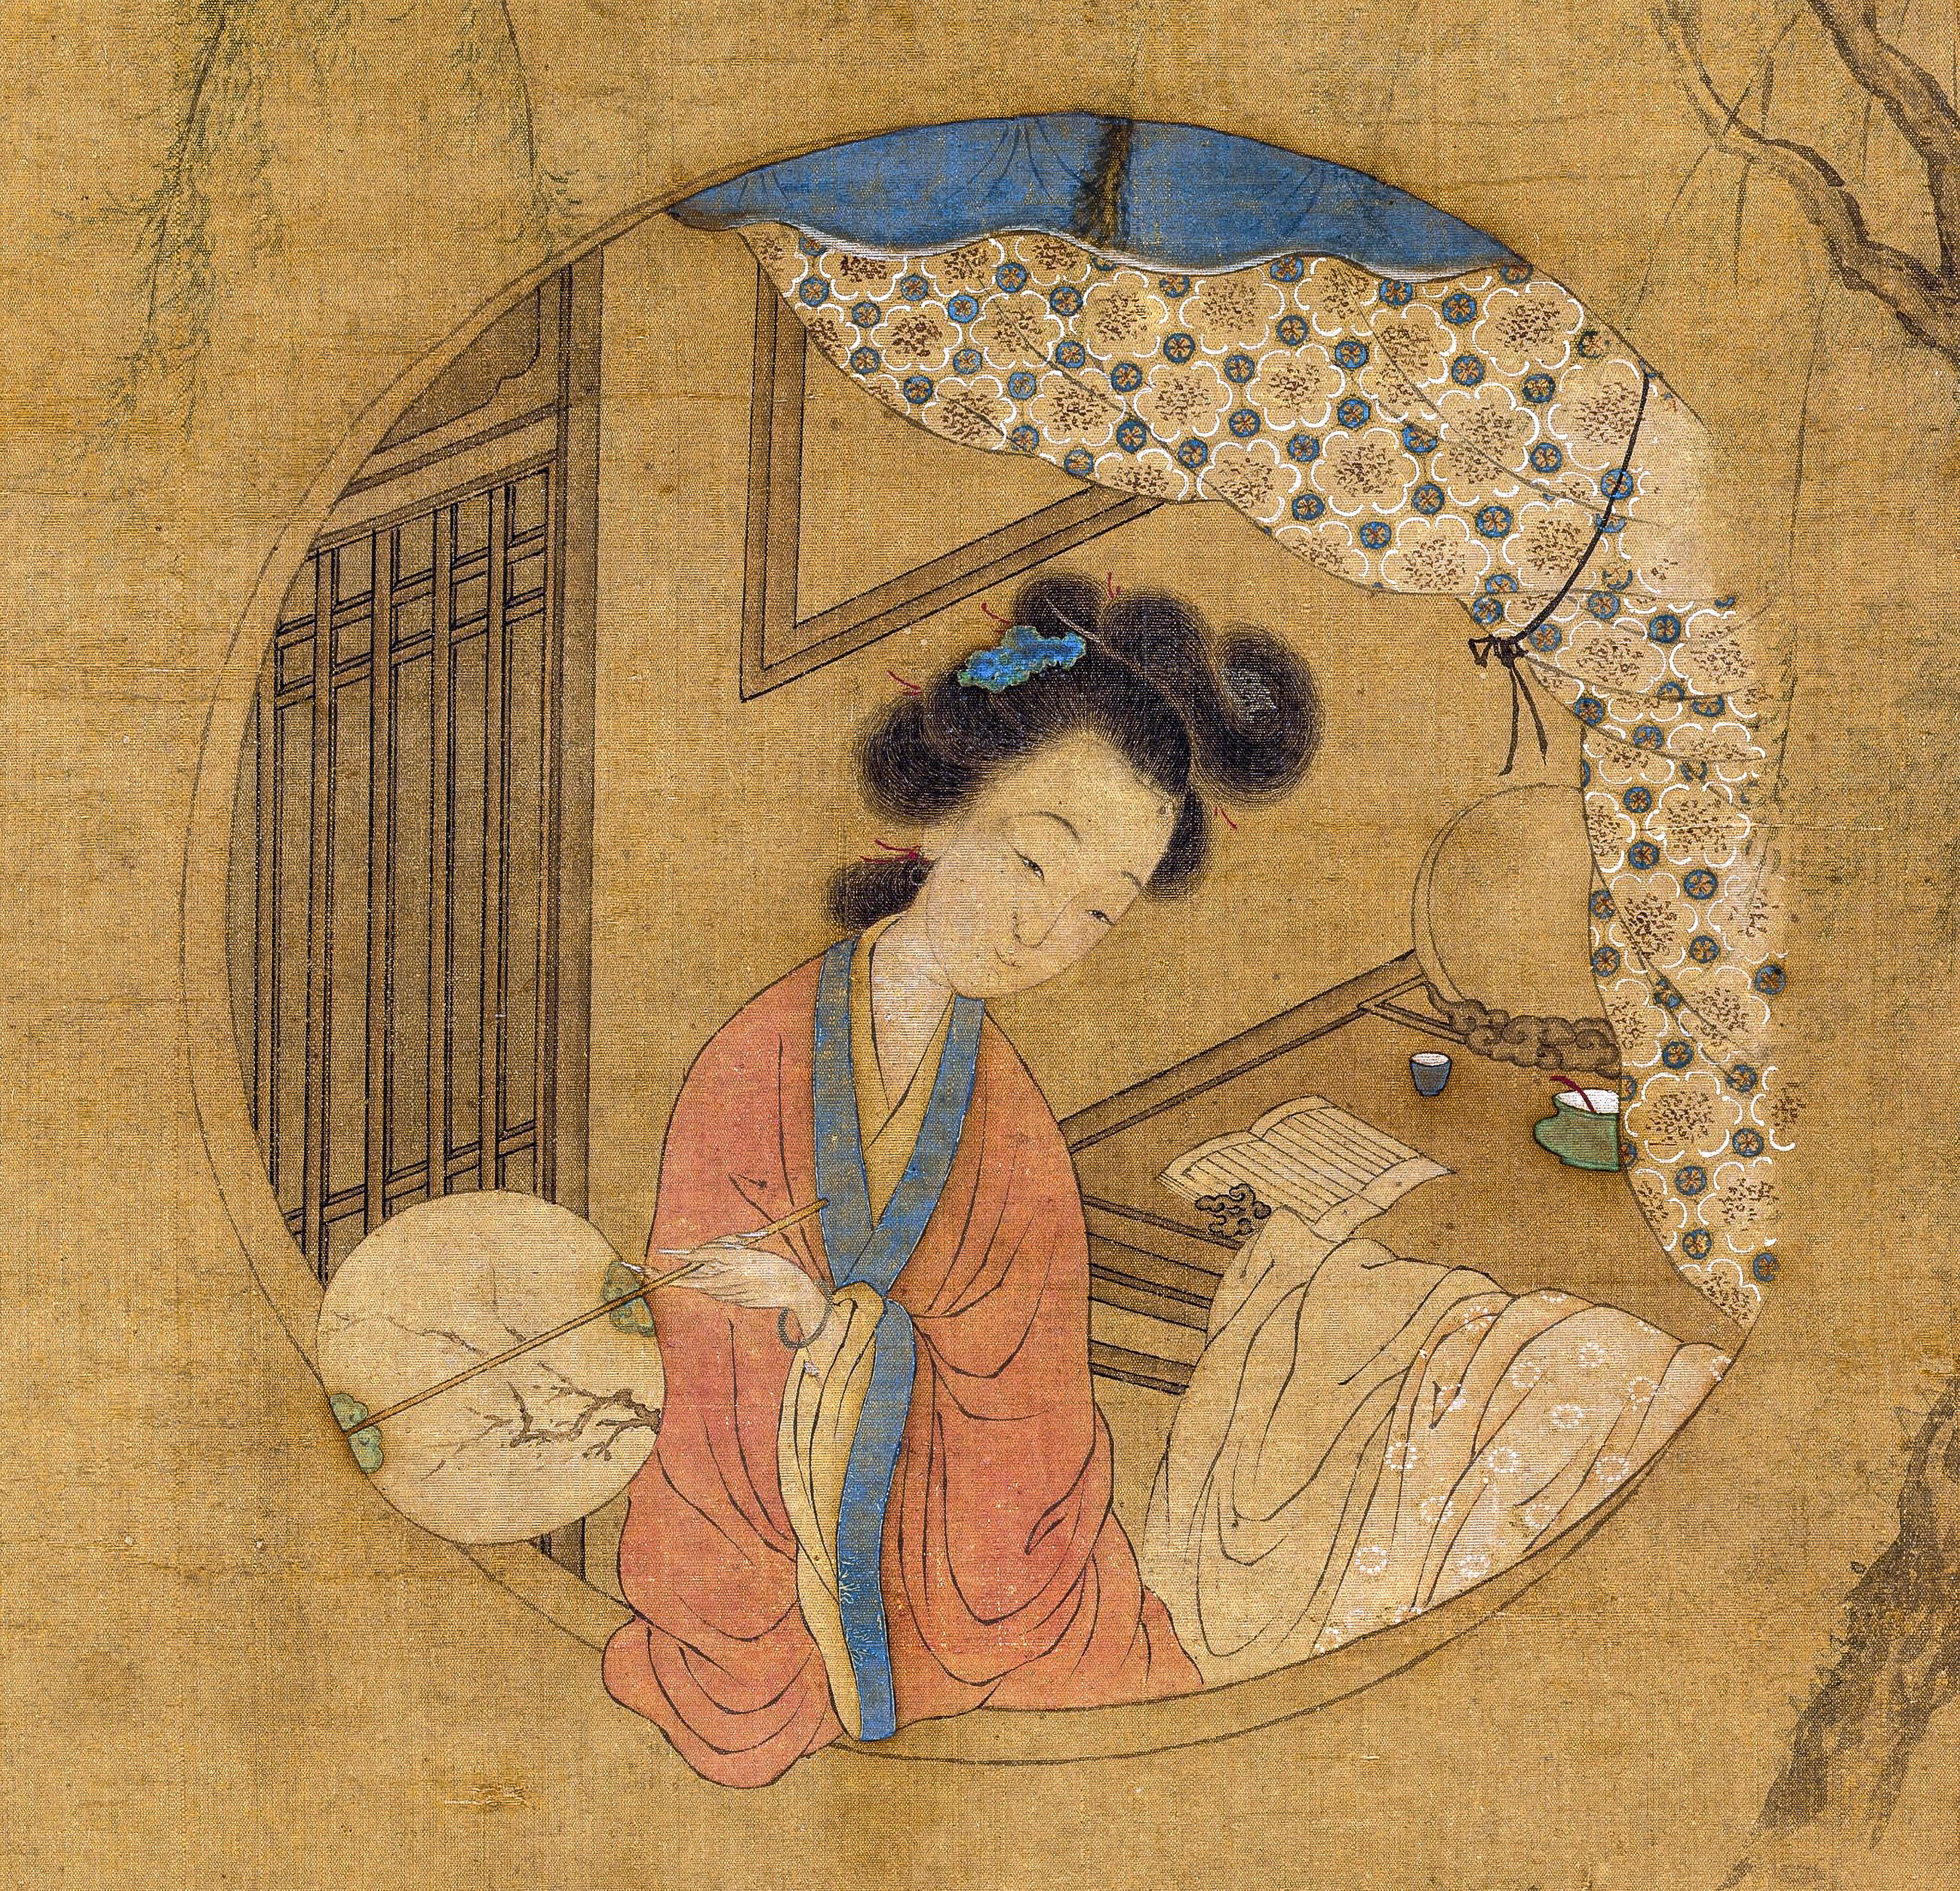 Li Xiangjun was both a famous Kunqu singer and, by the age of 13, an accomplished pipa player of the pipa. She was sold to the Meixiang Lou brothel near the Nanjing Confucian Temple. Image: Wikipedia